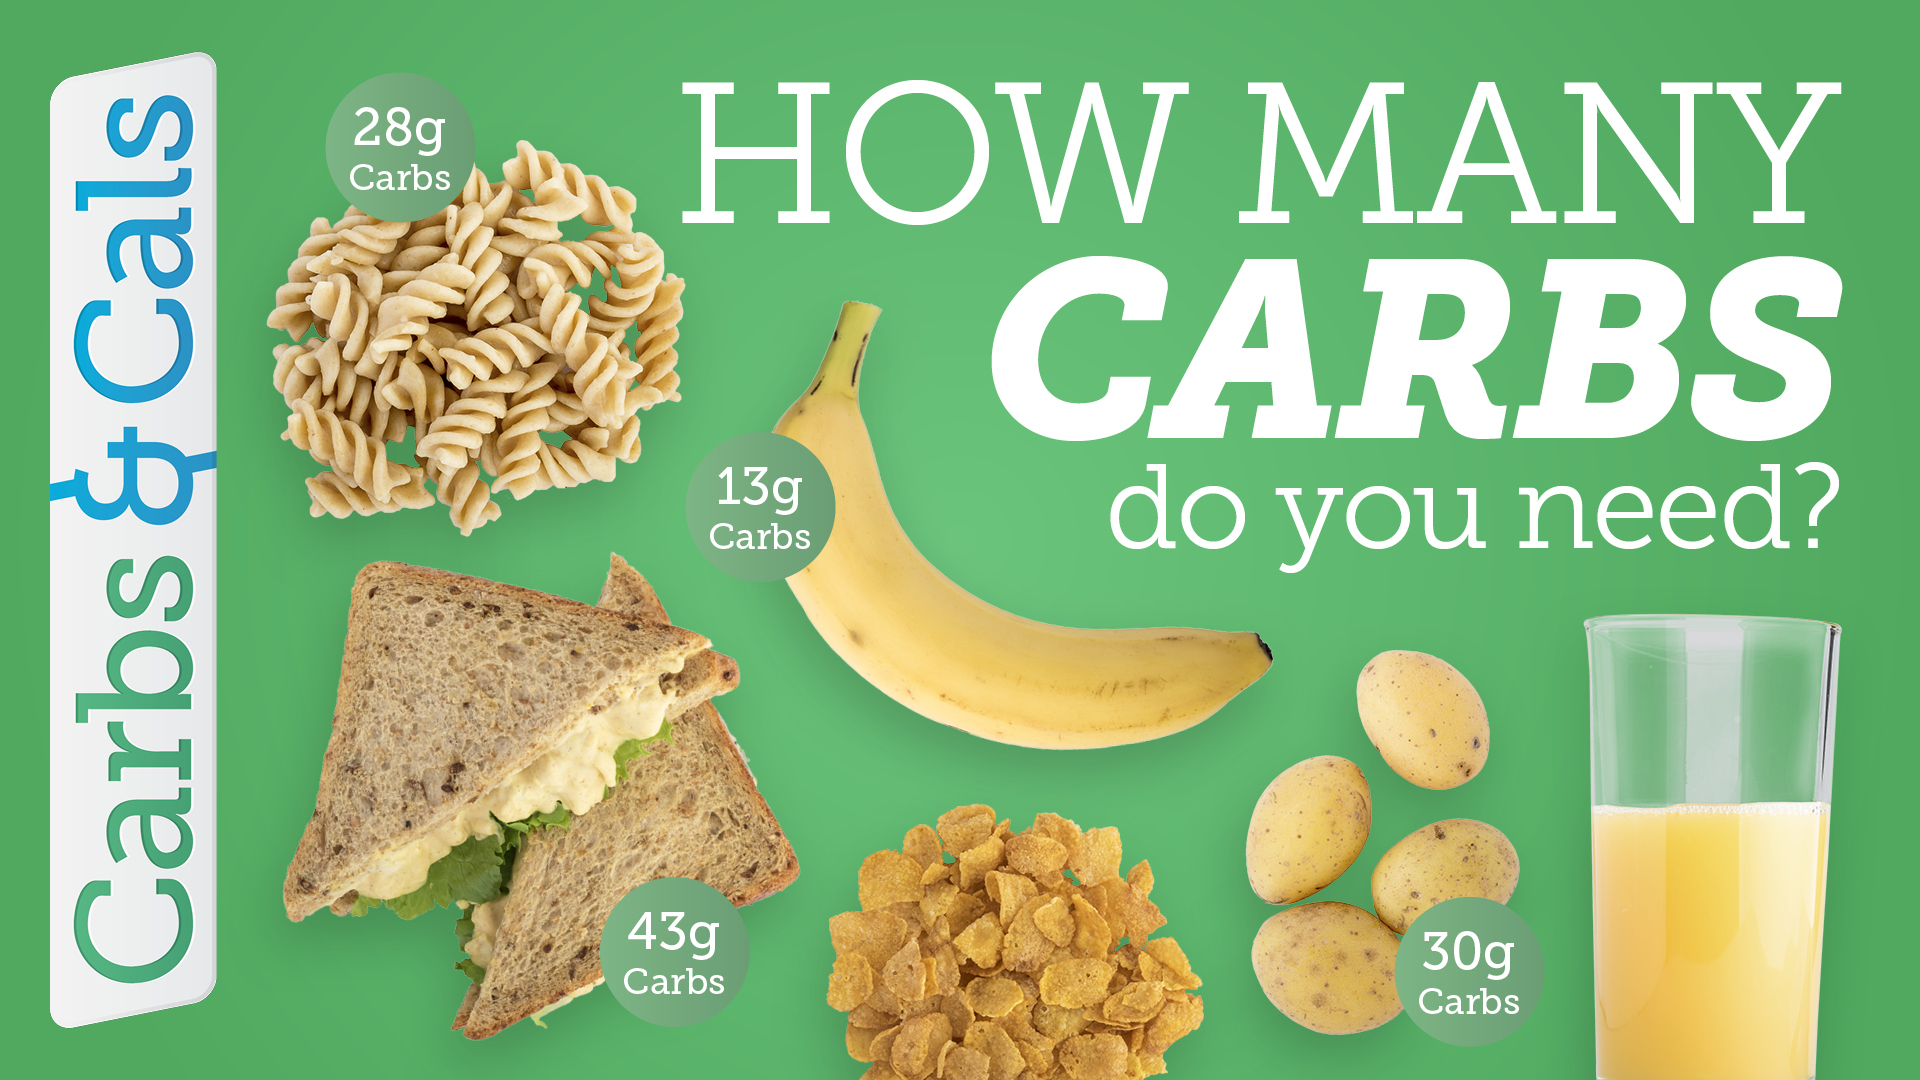 Video - How Many Carbs Do You Need Each Day?